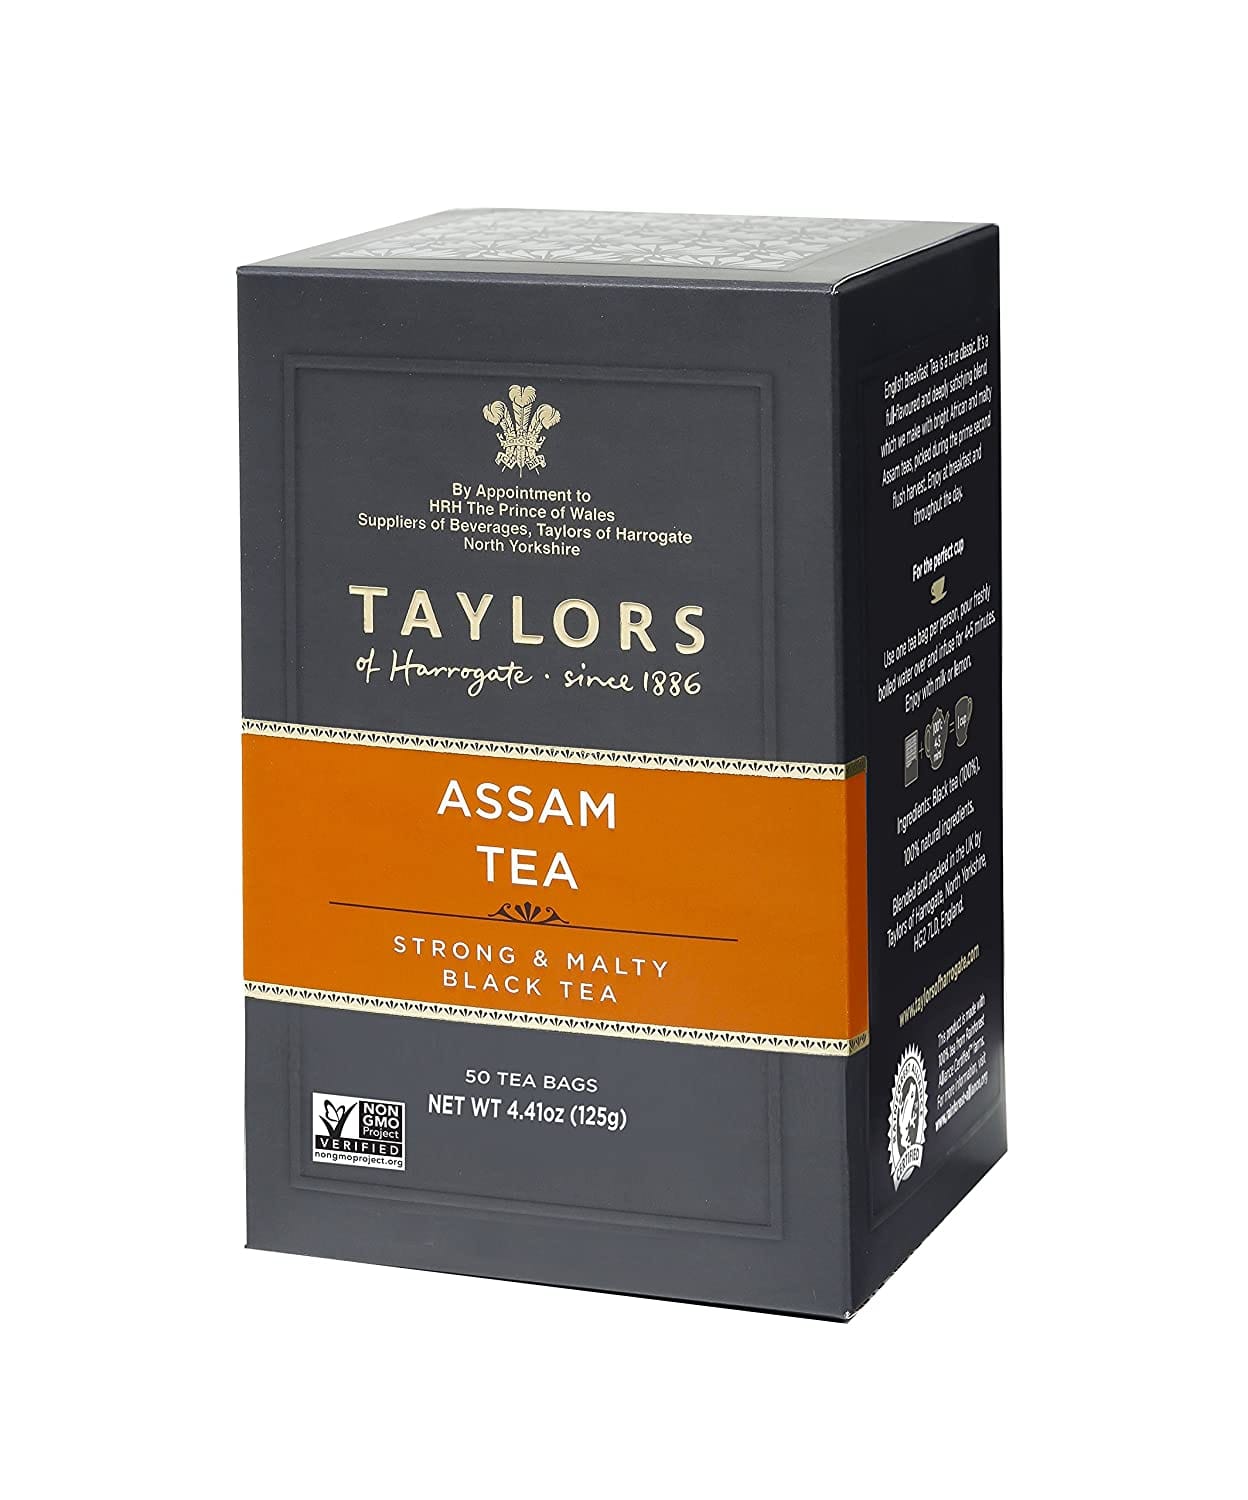 Taylors of Harrogate Pure Assam, 50 Teabags, (Pack of 6) S&S $28.50 or $25.50